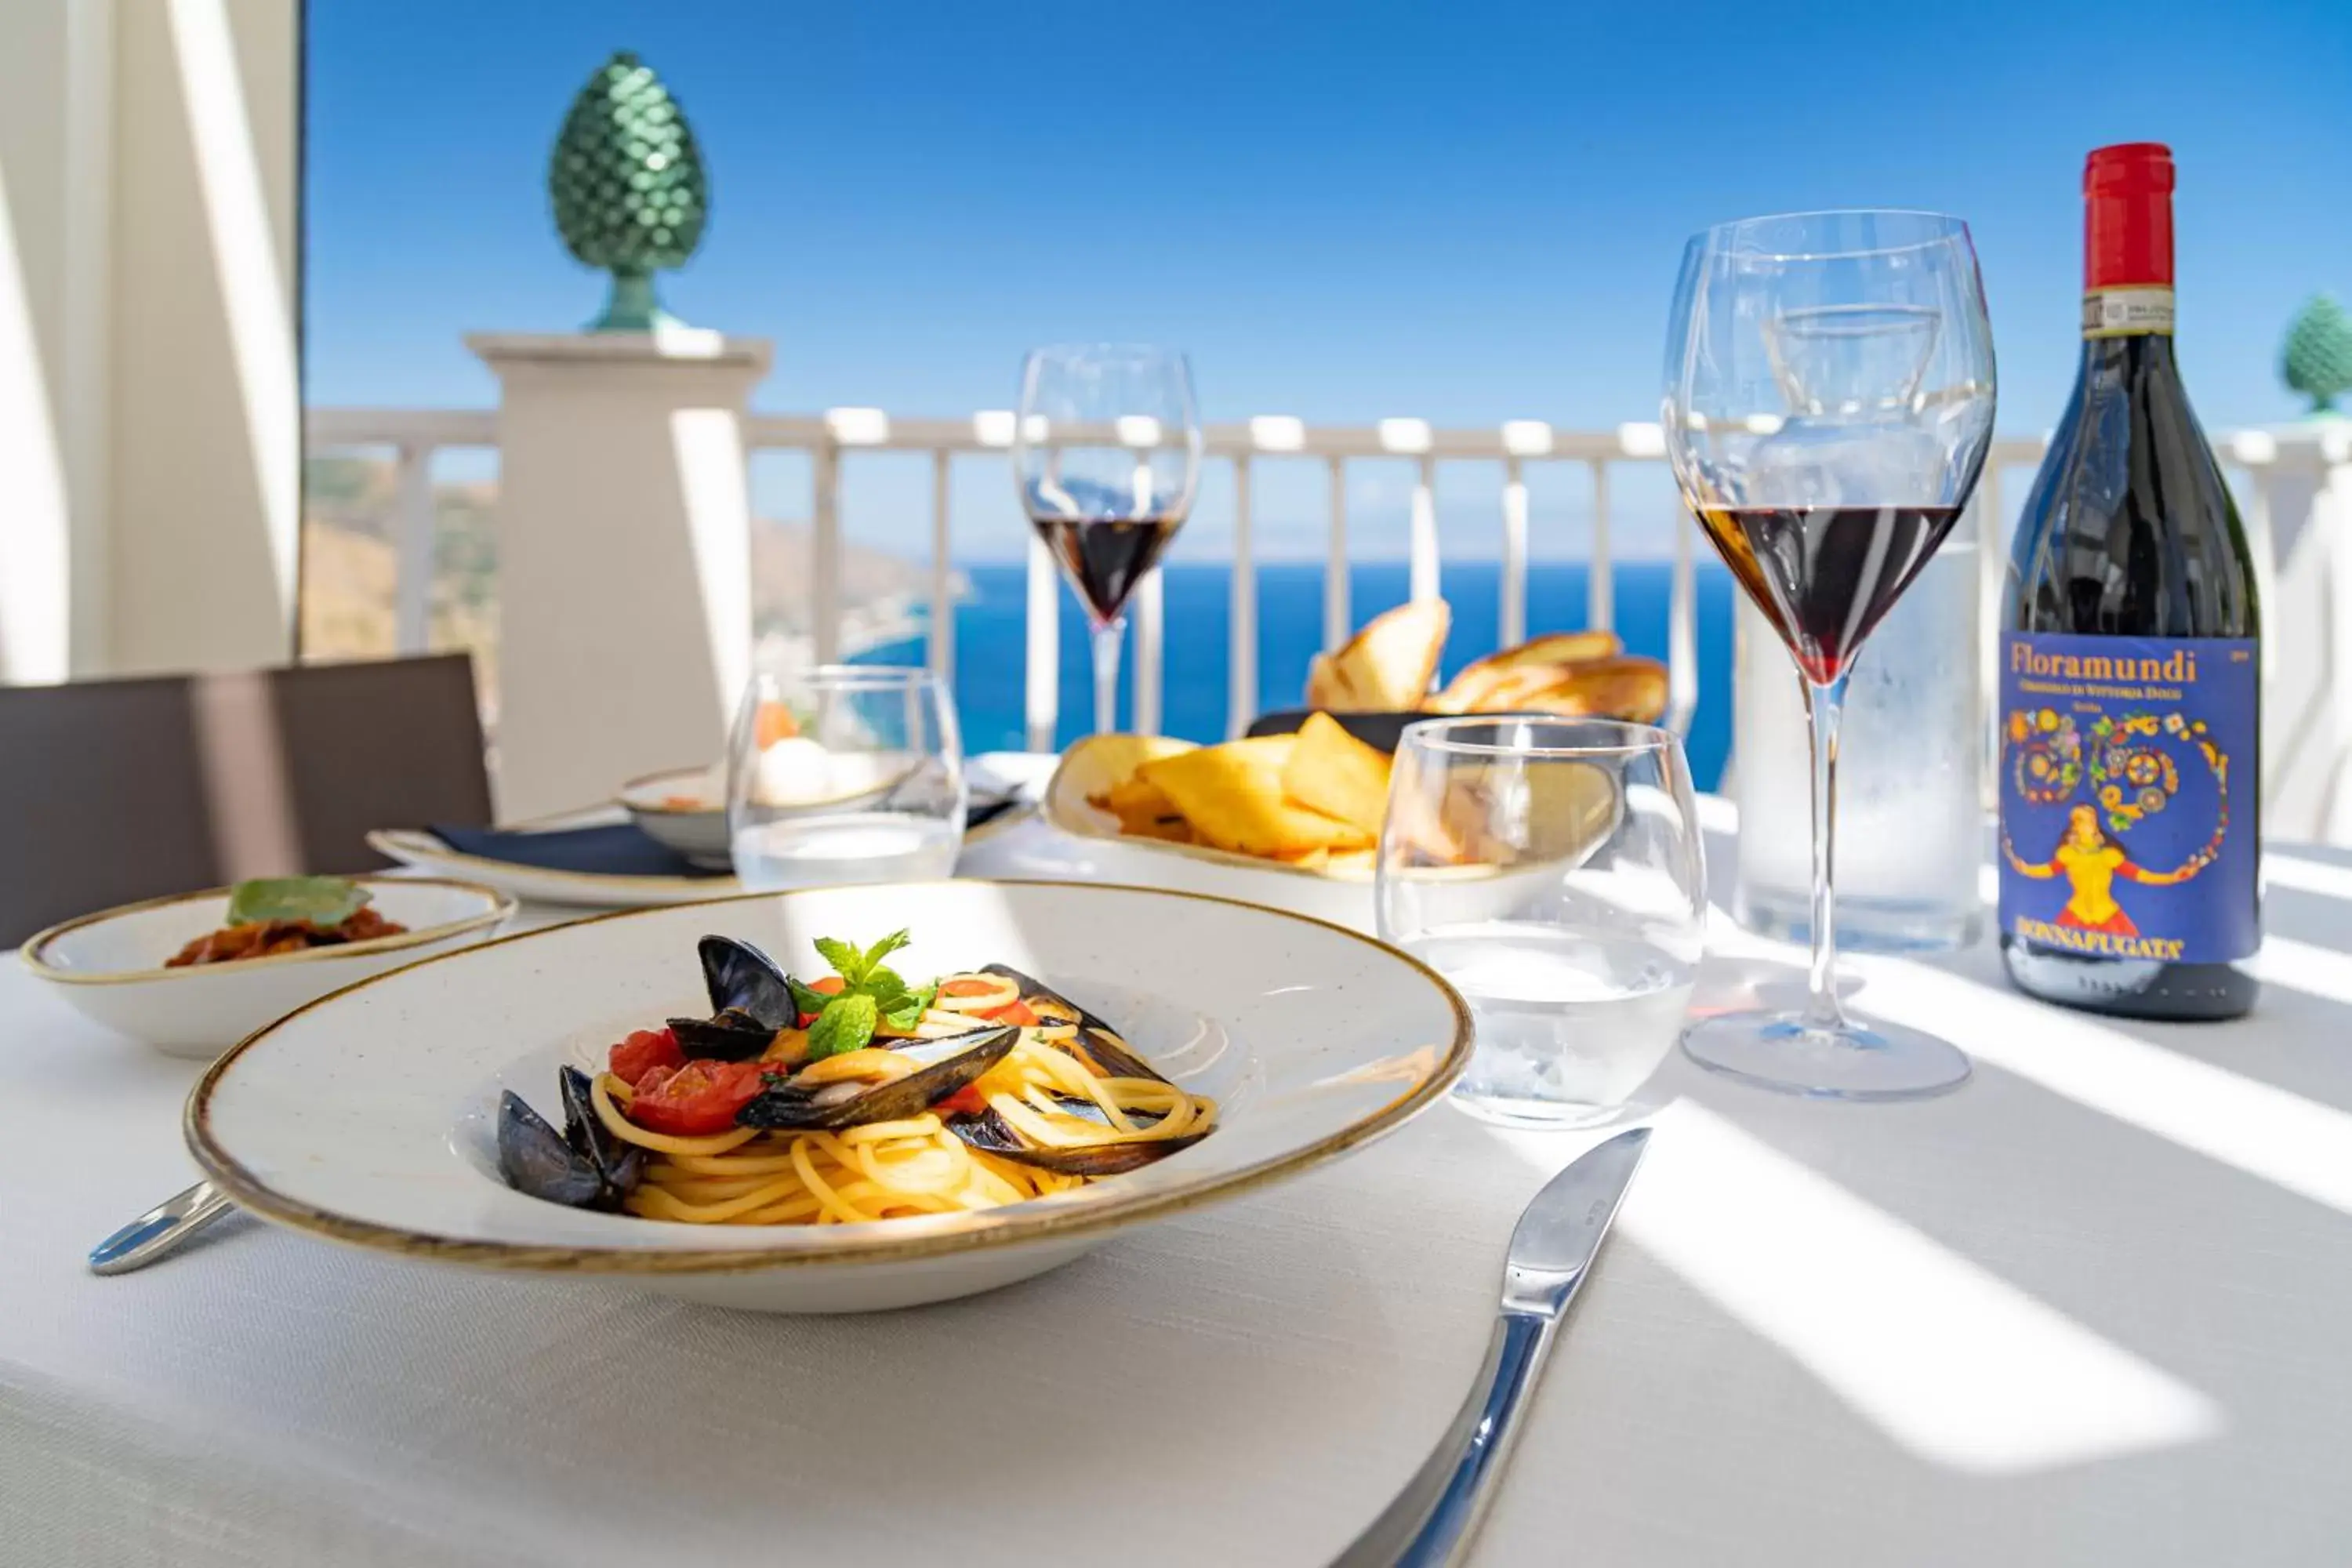 Food and drinks, Lunch and Dinner in Splendid Hotel Taormina